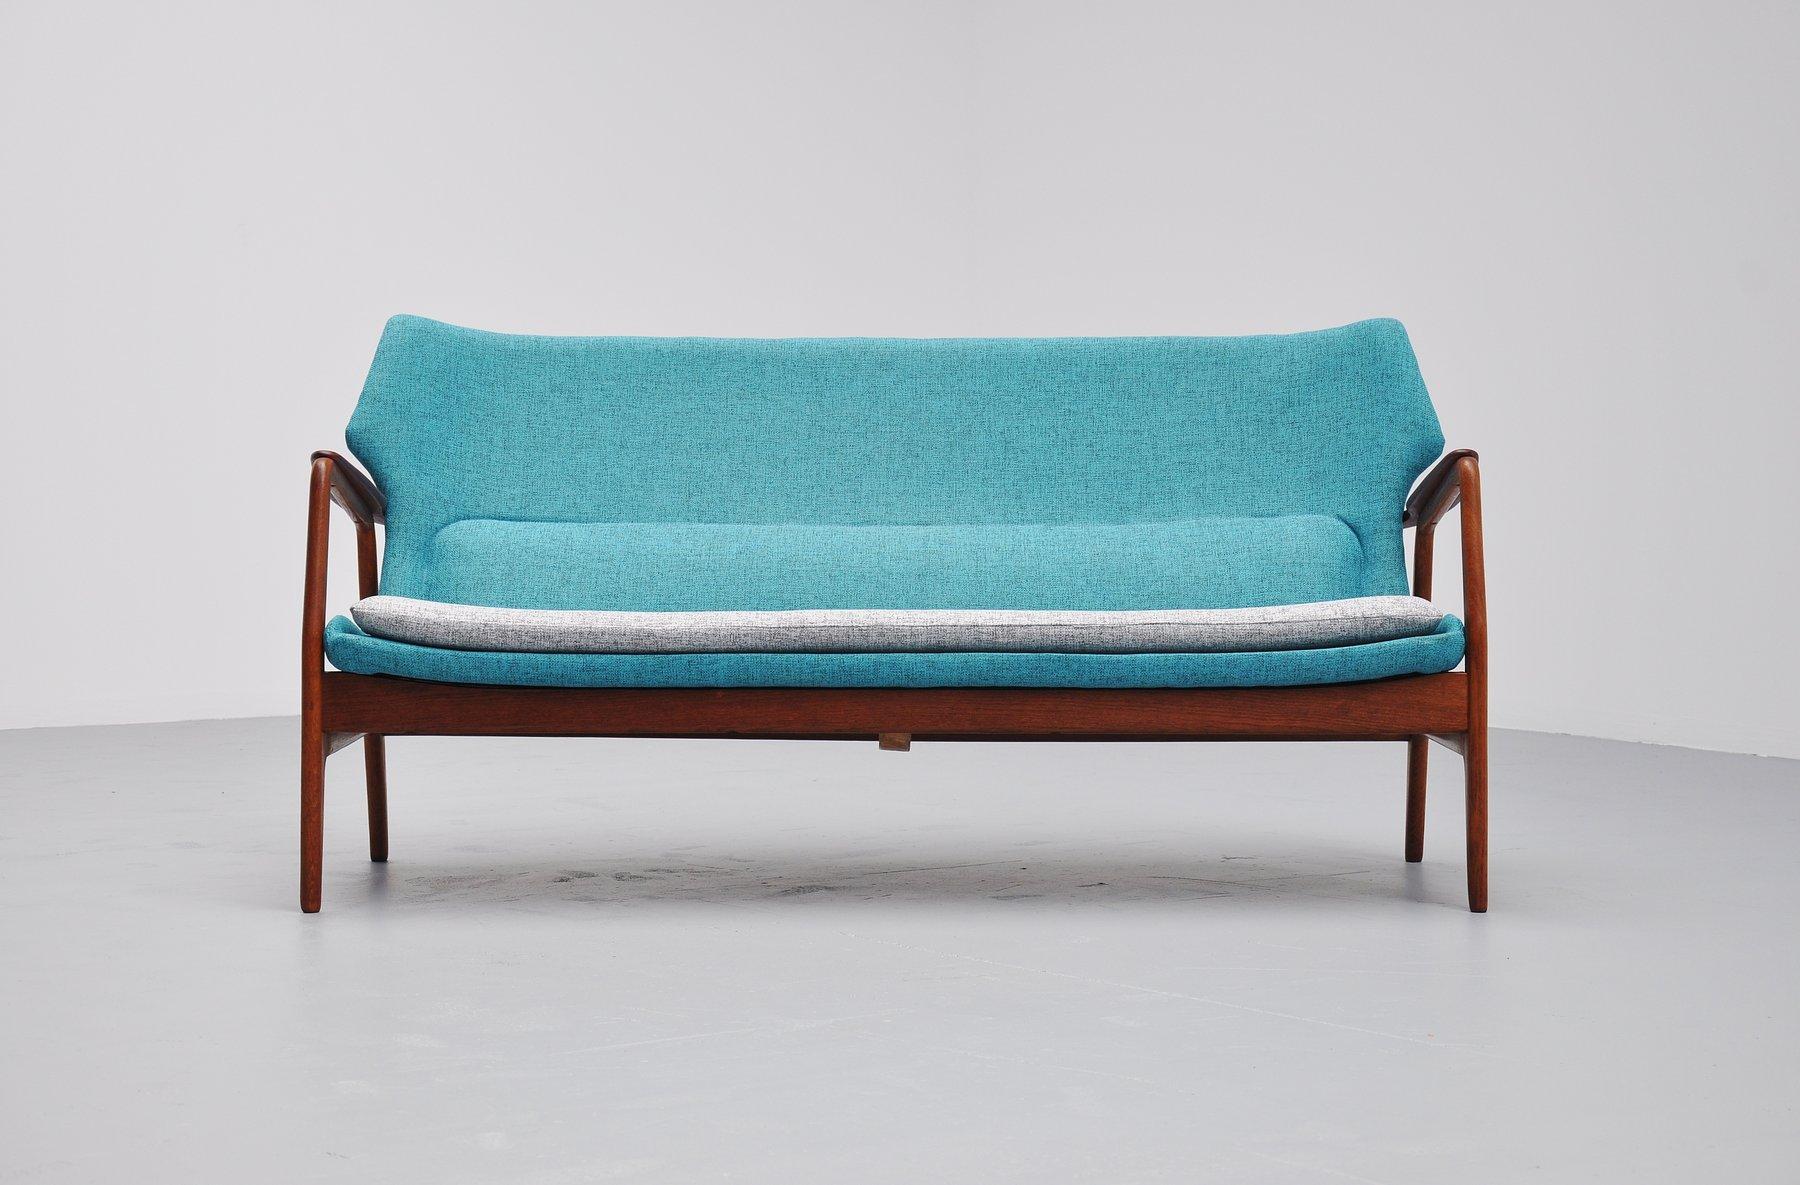 Fantastic lounge sofa designed by Aksel Bender Madsen for Bovenkamp, Holland 1960. Bovenkamp was known for its quality furniture and Danish import furniture. This sofa is completely newly upholstered including new foam. We choose a nice bright blue